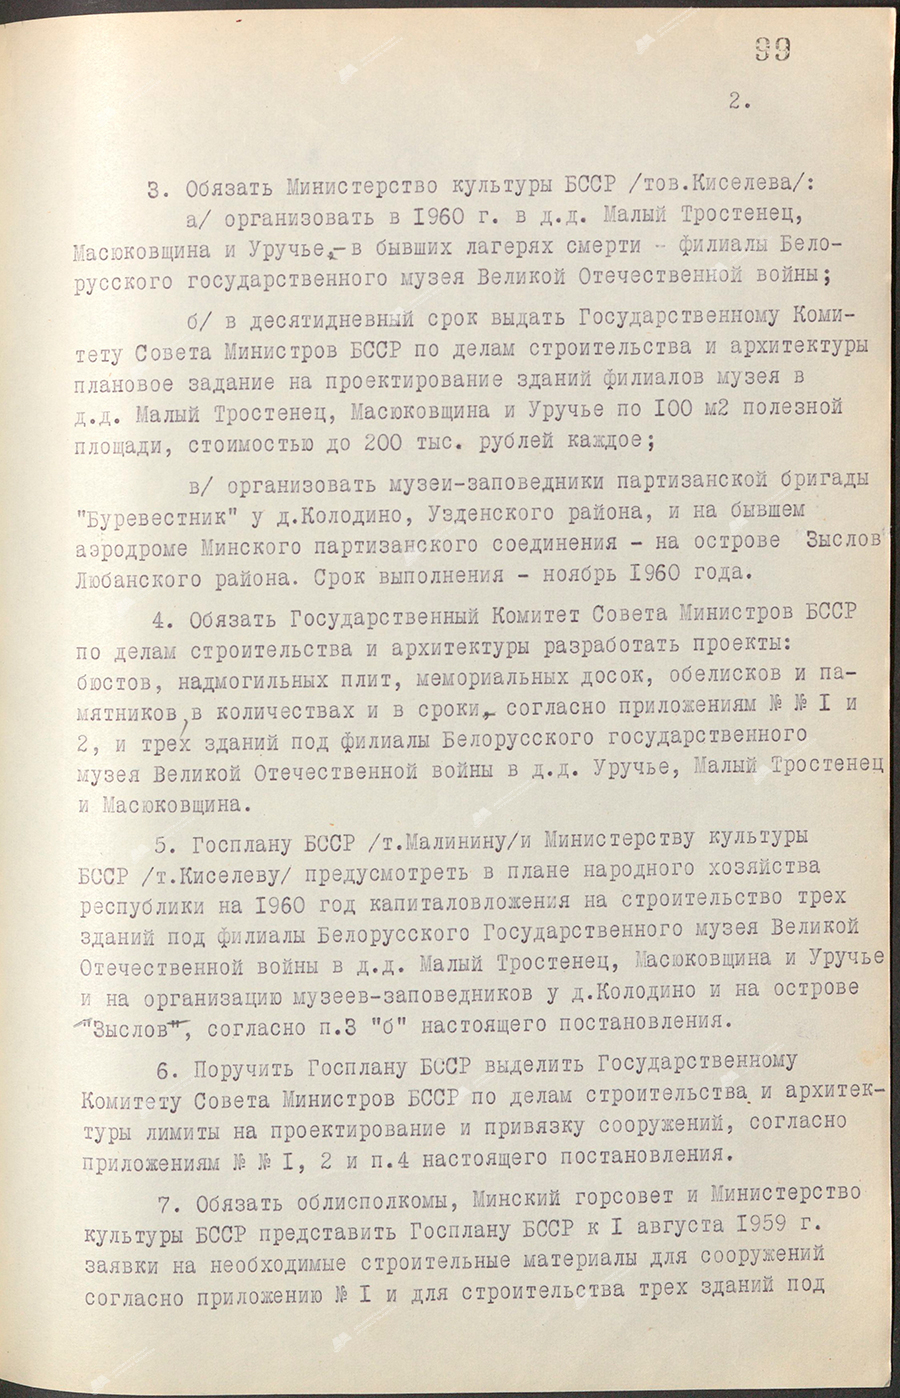 Resolution No. 248 of the Council of Ministers of the BSSR «On the improvement of burial places of soldiers of the Soviet Army, partisans and civilians who died in 1941 – 1945.» and on the perpetuation of significant places and events associated with the Great Patriotic War on the territory of the Belarusian SSR»-с. 1